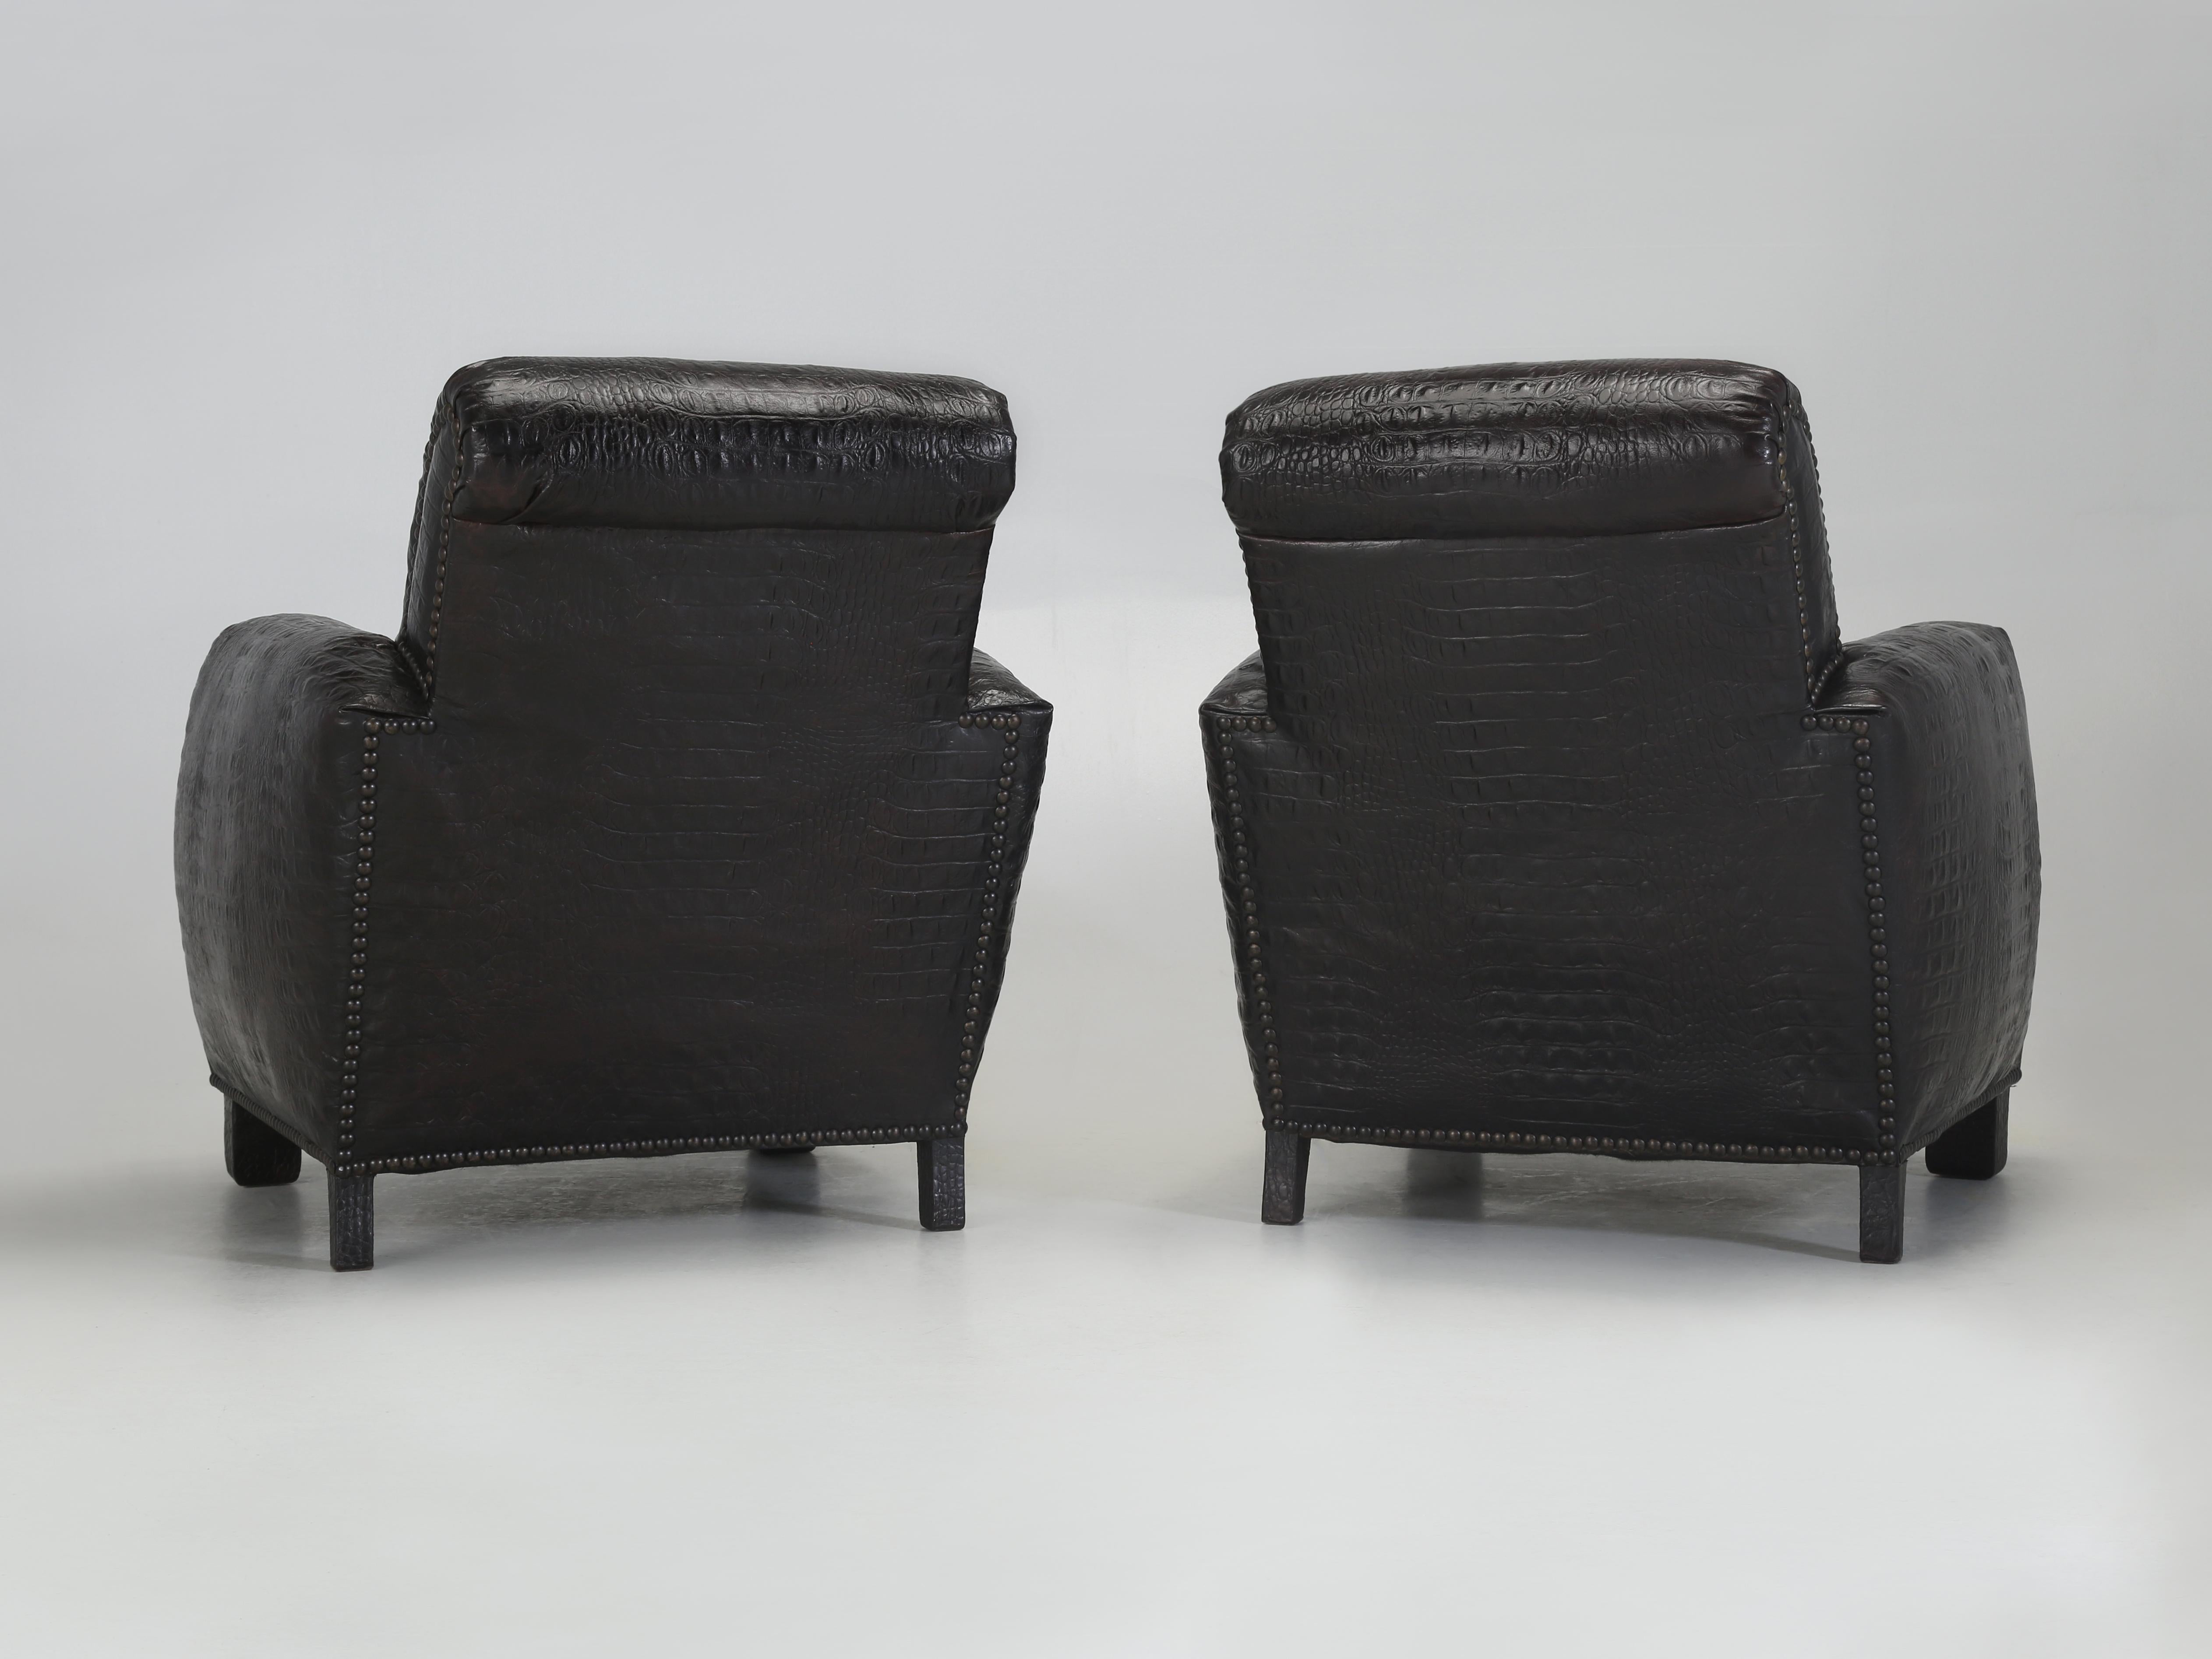 Pair of French Art Deco Leather Club Chairs covered in a Faux Crocodile Leather. For Sale 11